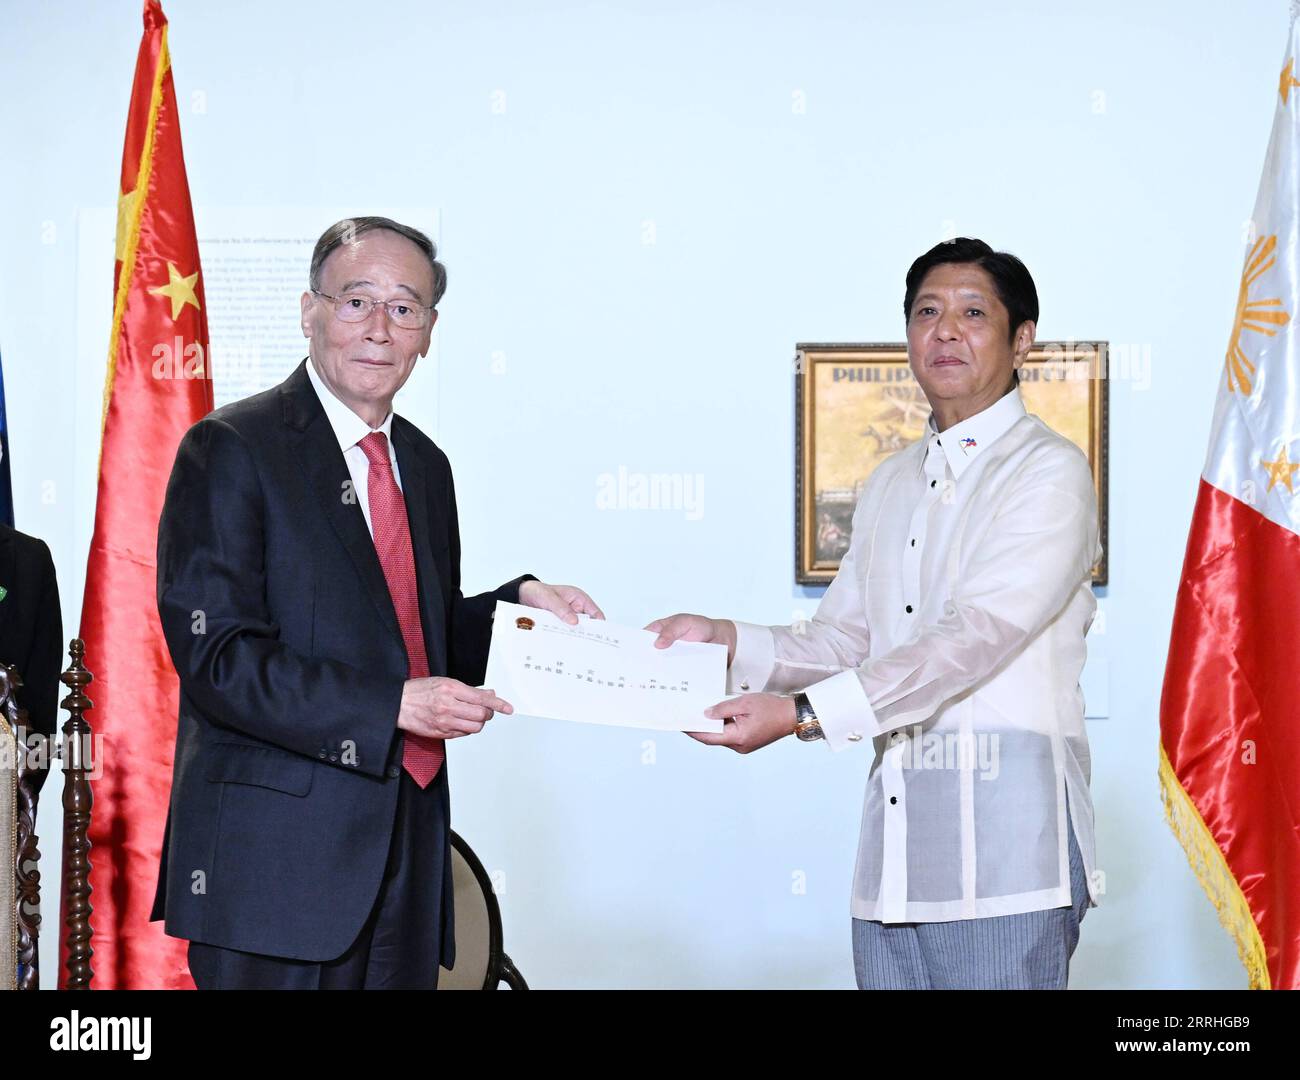 220630 -- MANILA, June 30, 2022 -- Chinese Vice President Wang Qishan delivers a congratulatory letter from Chinese President Xi Jinping to Philippine President Ferdinand Romualdez Marcos during their meeting in Manila, the Philippines, June 30, 2022. As Chinese President Xi Jinping s special representative, Wang attended the Philippine presidential inauguration of Ferdinand Romualdez Marcos on Thursday at the invitation of the government of the Philippines.  PHILIPPINES-MANILA-PRESIDENT-CHINA-WANG QISHAN-MEETING ZhangxLing PUBLICATIONxNOTxINxCHN Stock Photo